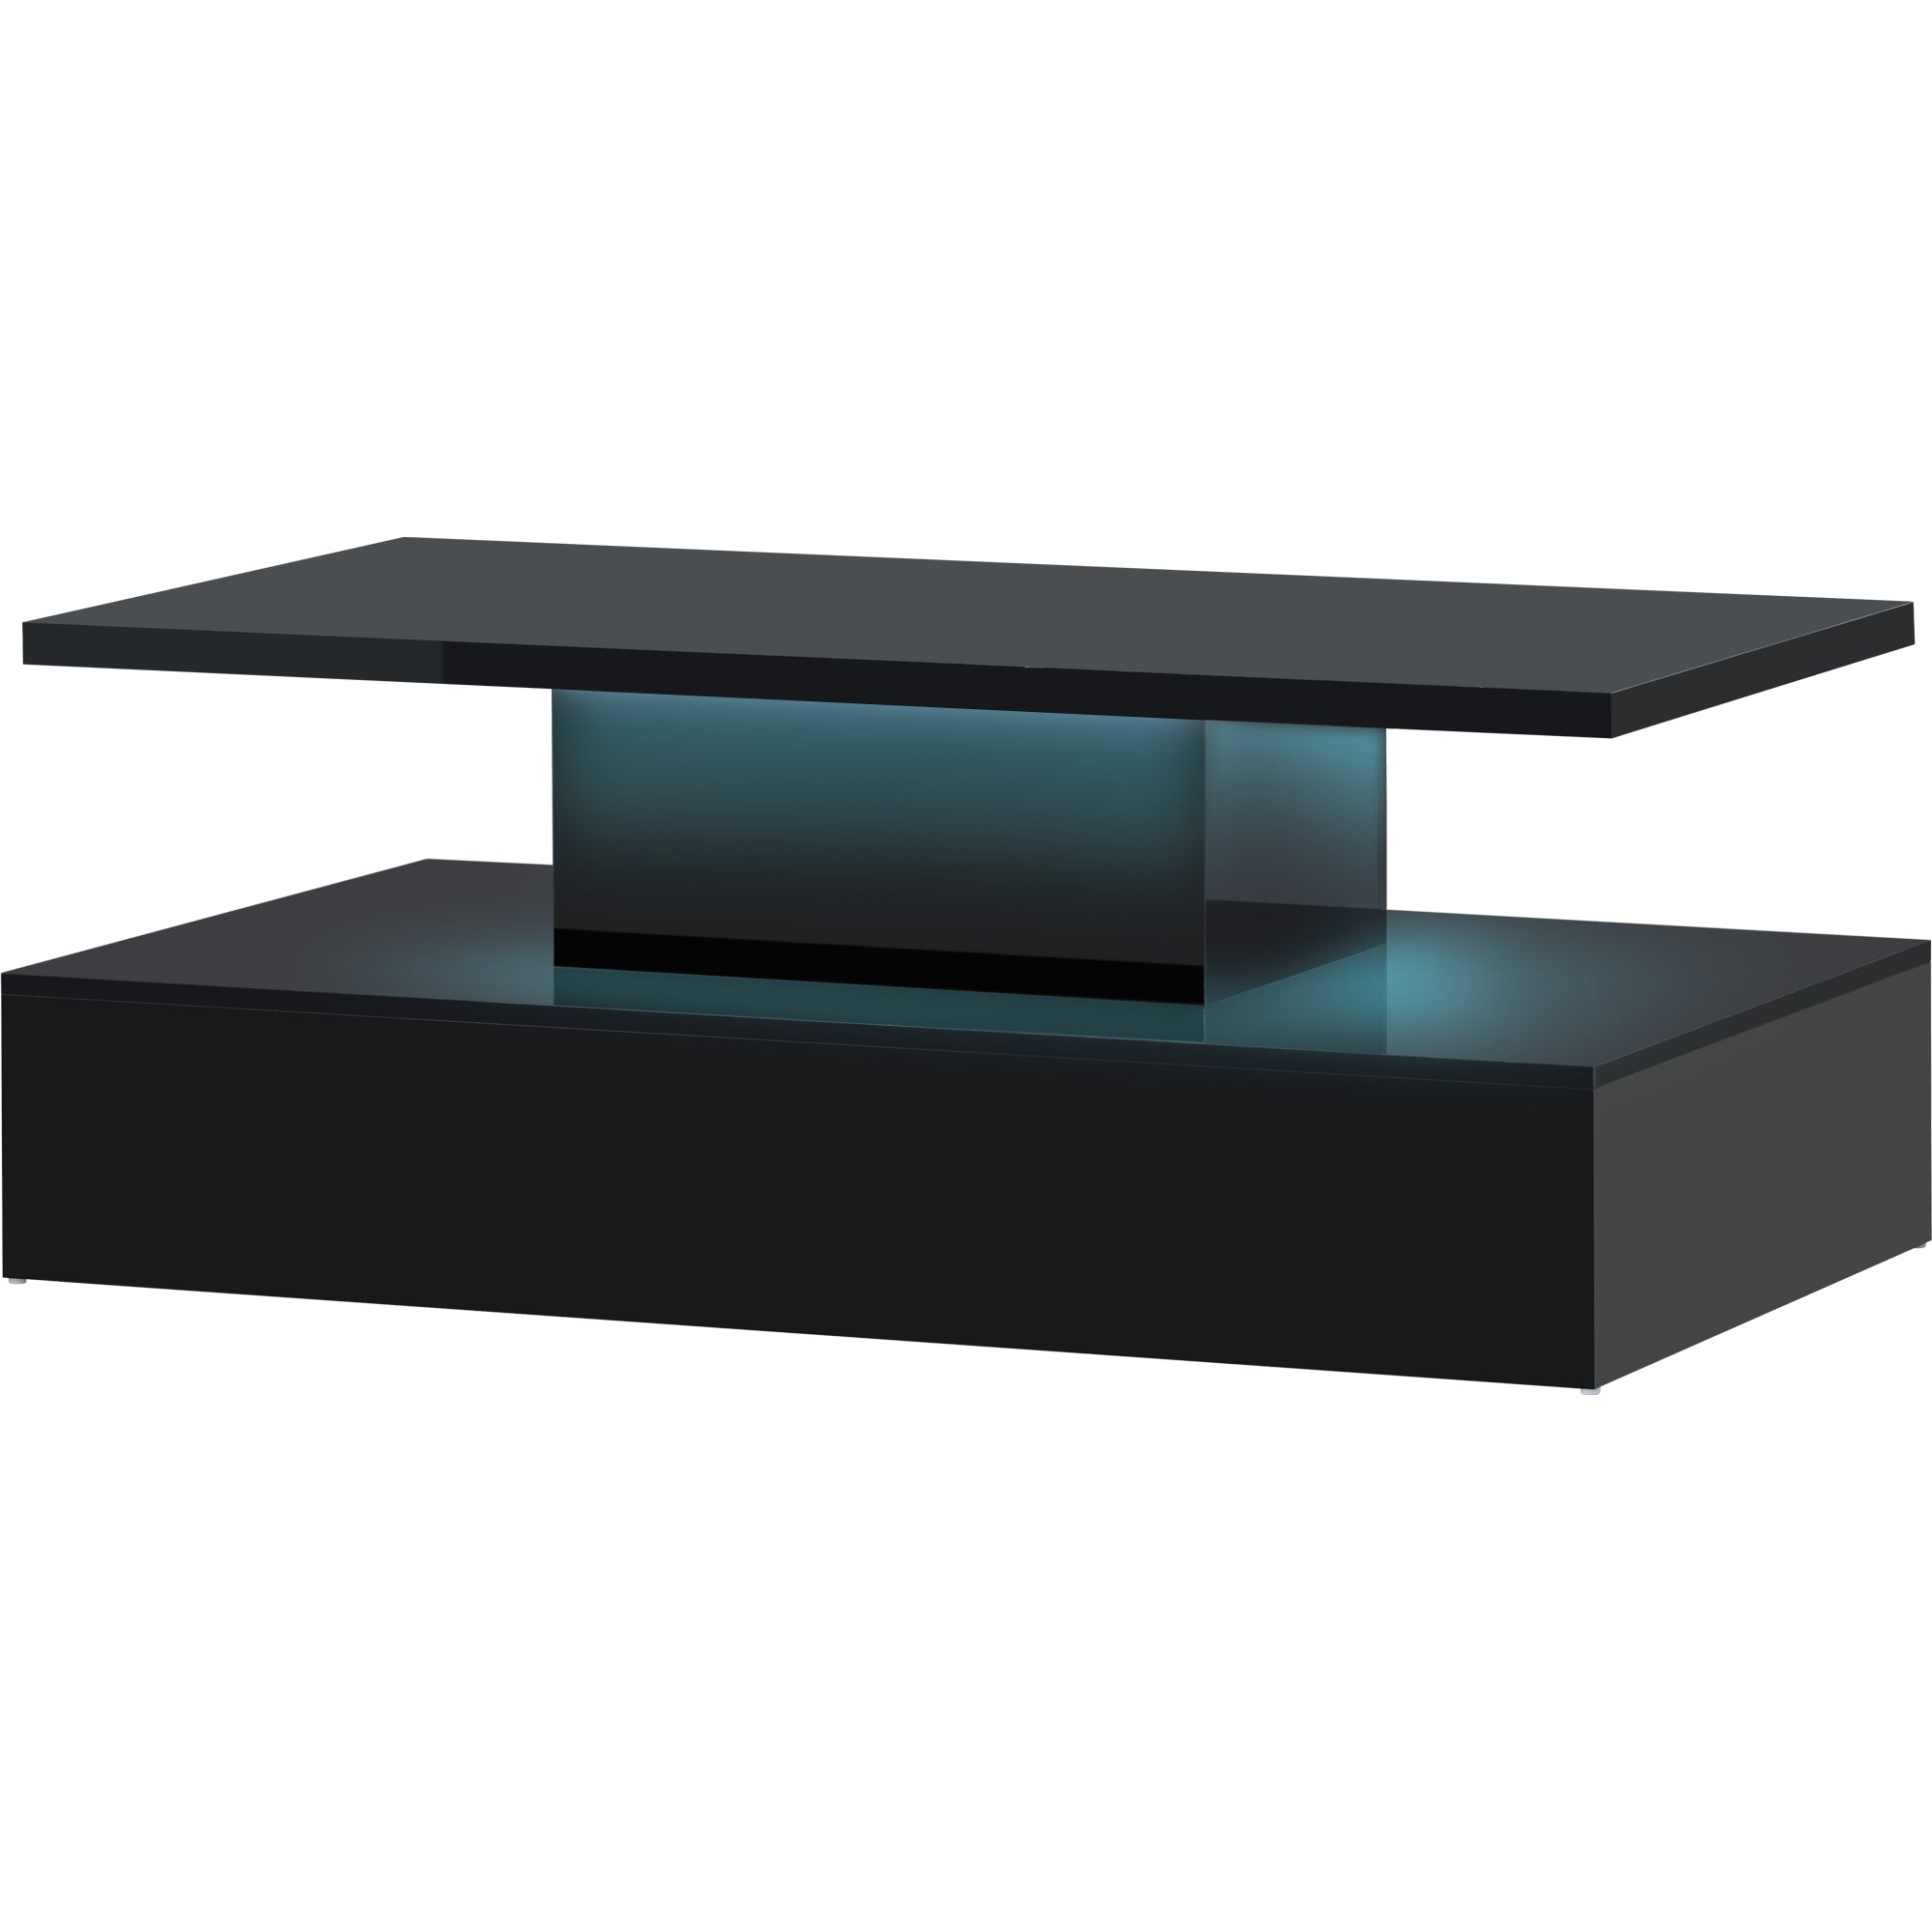 ON TREND Coffee Table Cocktail Table Modern Industrial black-particle board